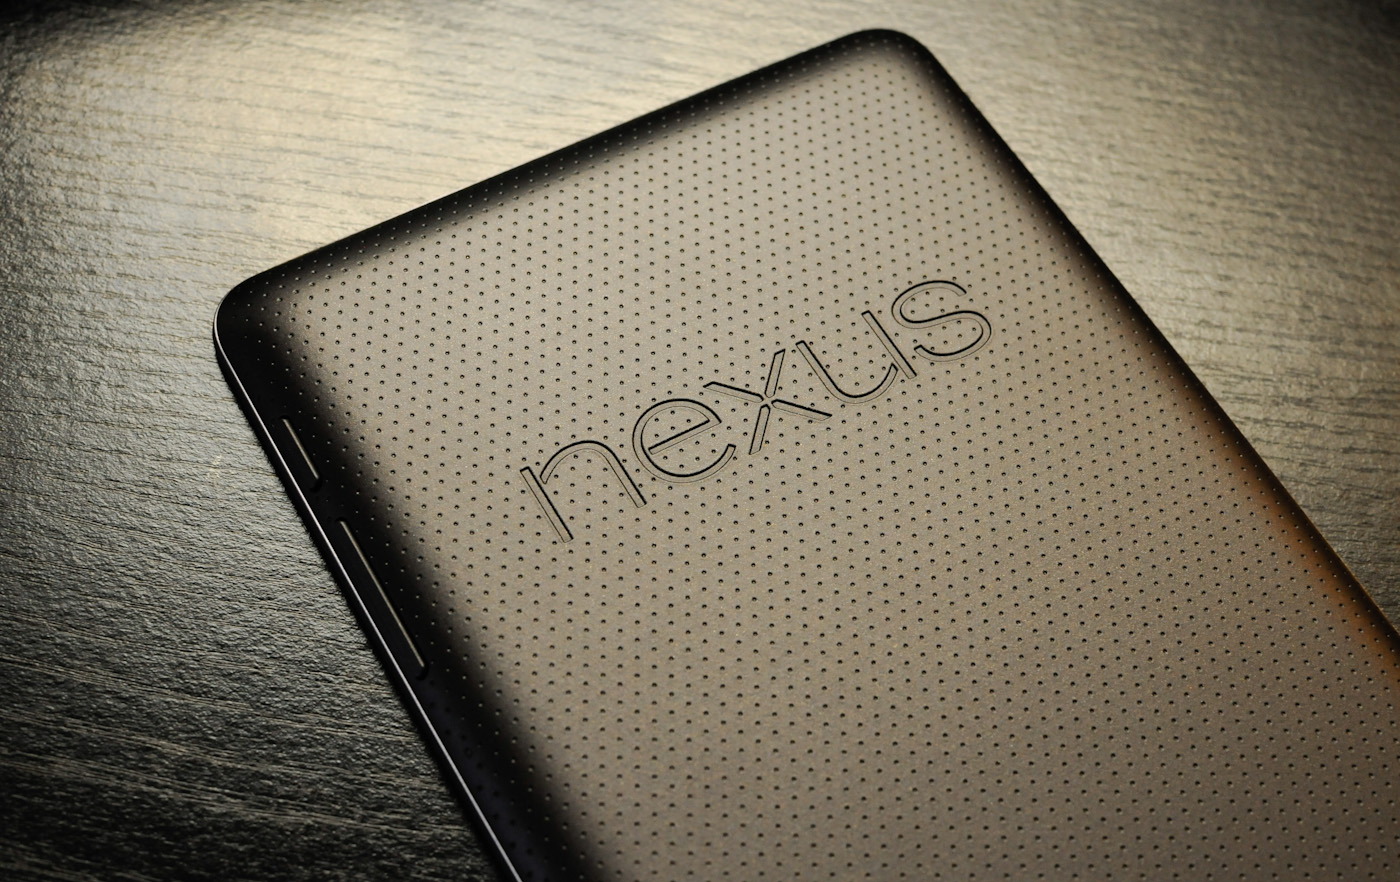 Nexus 6 & Nexus 8 with Android L Promise a Redefined Smartphone Experience